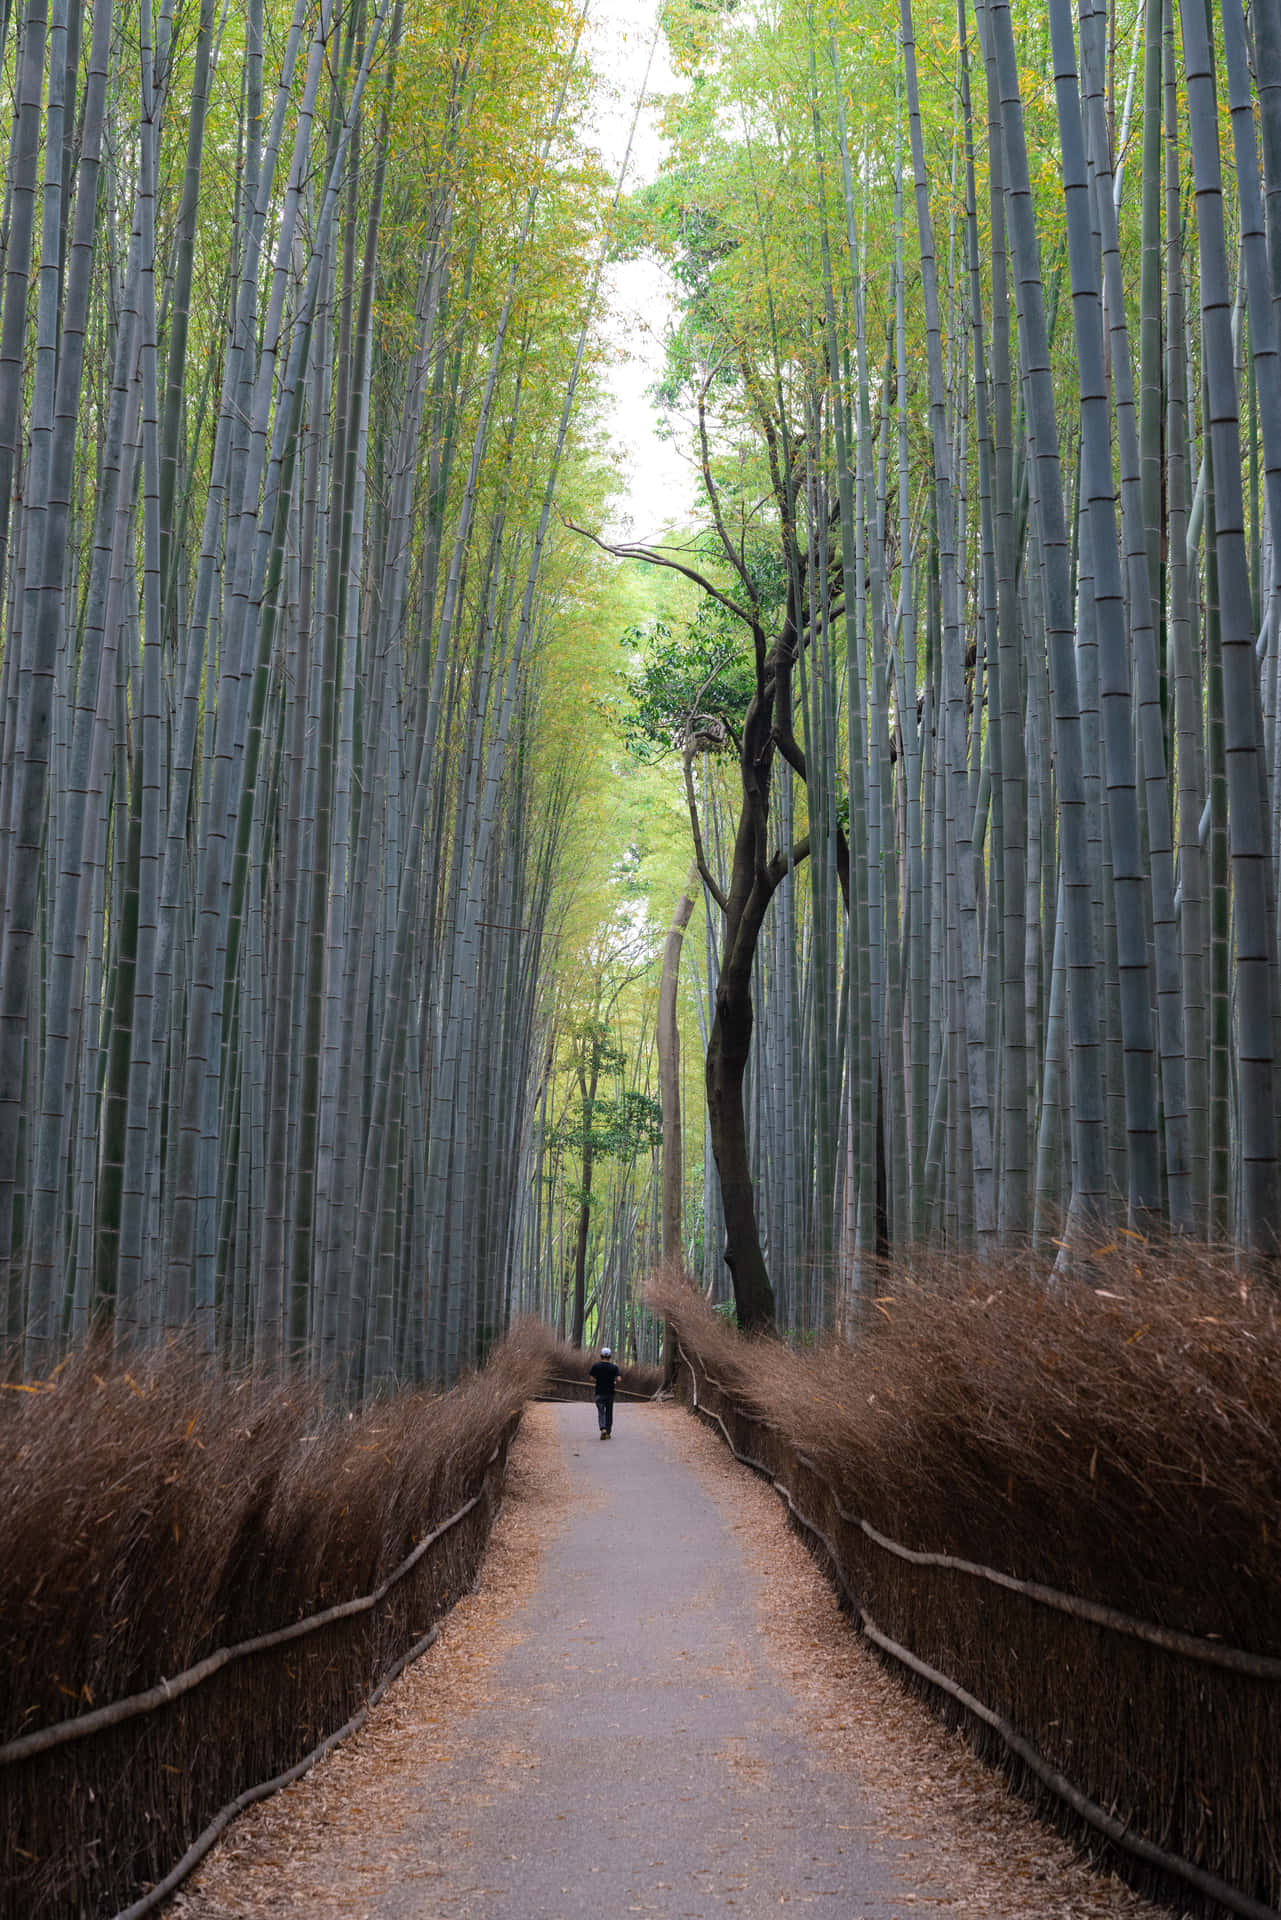 Man In Bamboo Forest Background